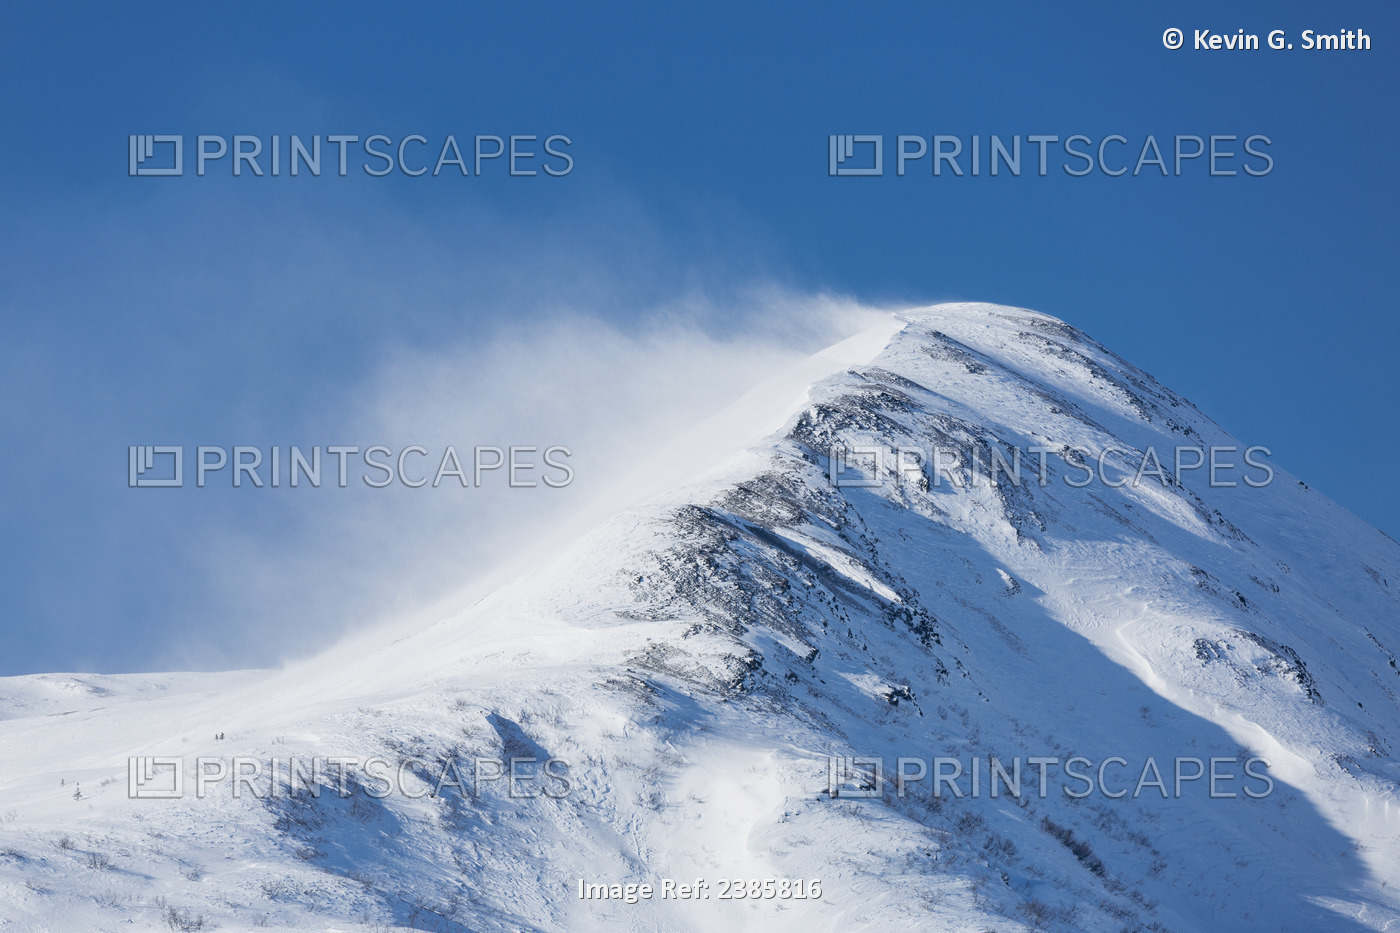 Wind Driven Snow Blows Off The Peak Of A Snow Covered Mountain In Wintertime, ...